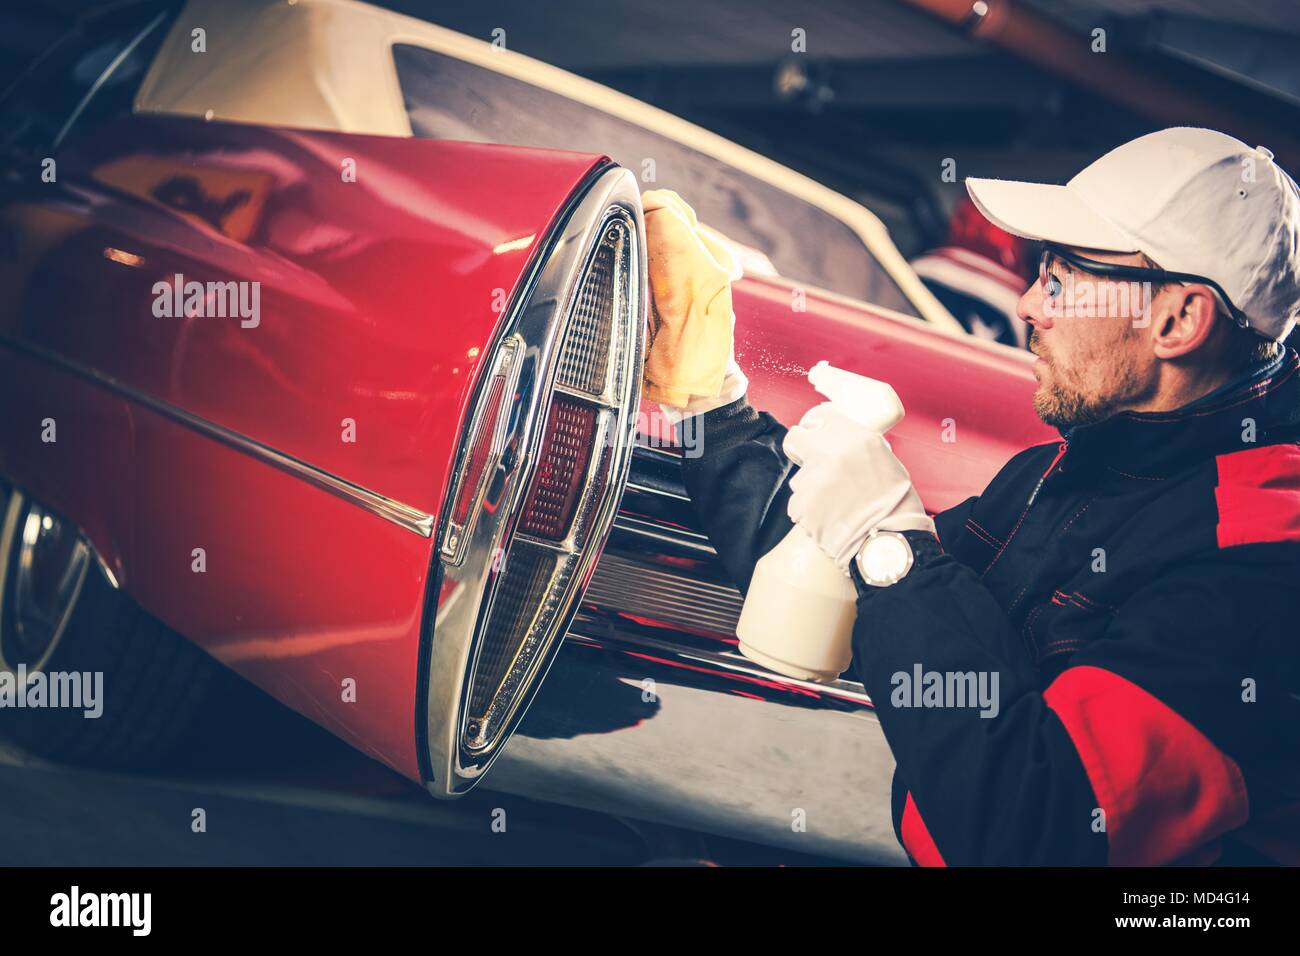 Classic Cars Detailing Cleaning Performing by Professional Body Cleaning Worker. Stock Photo